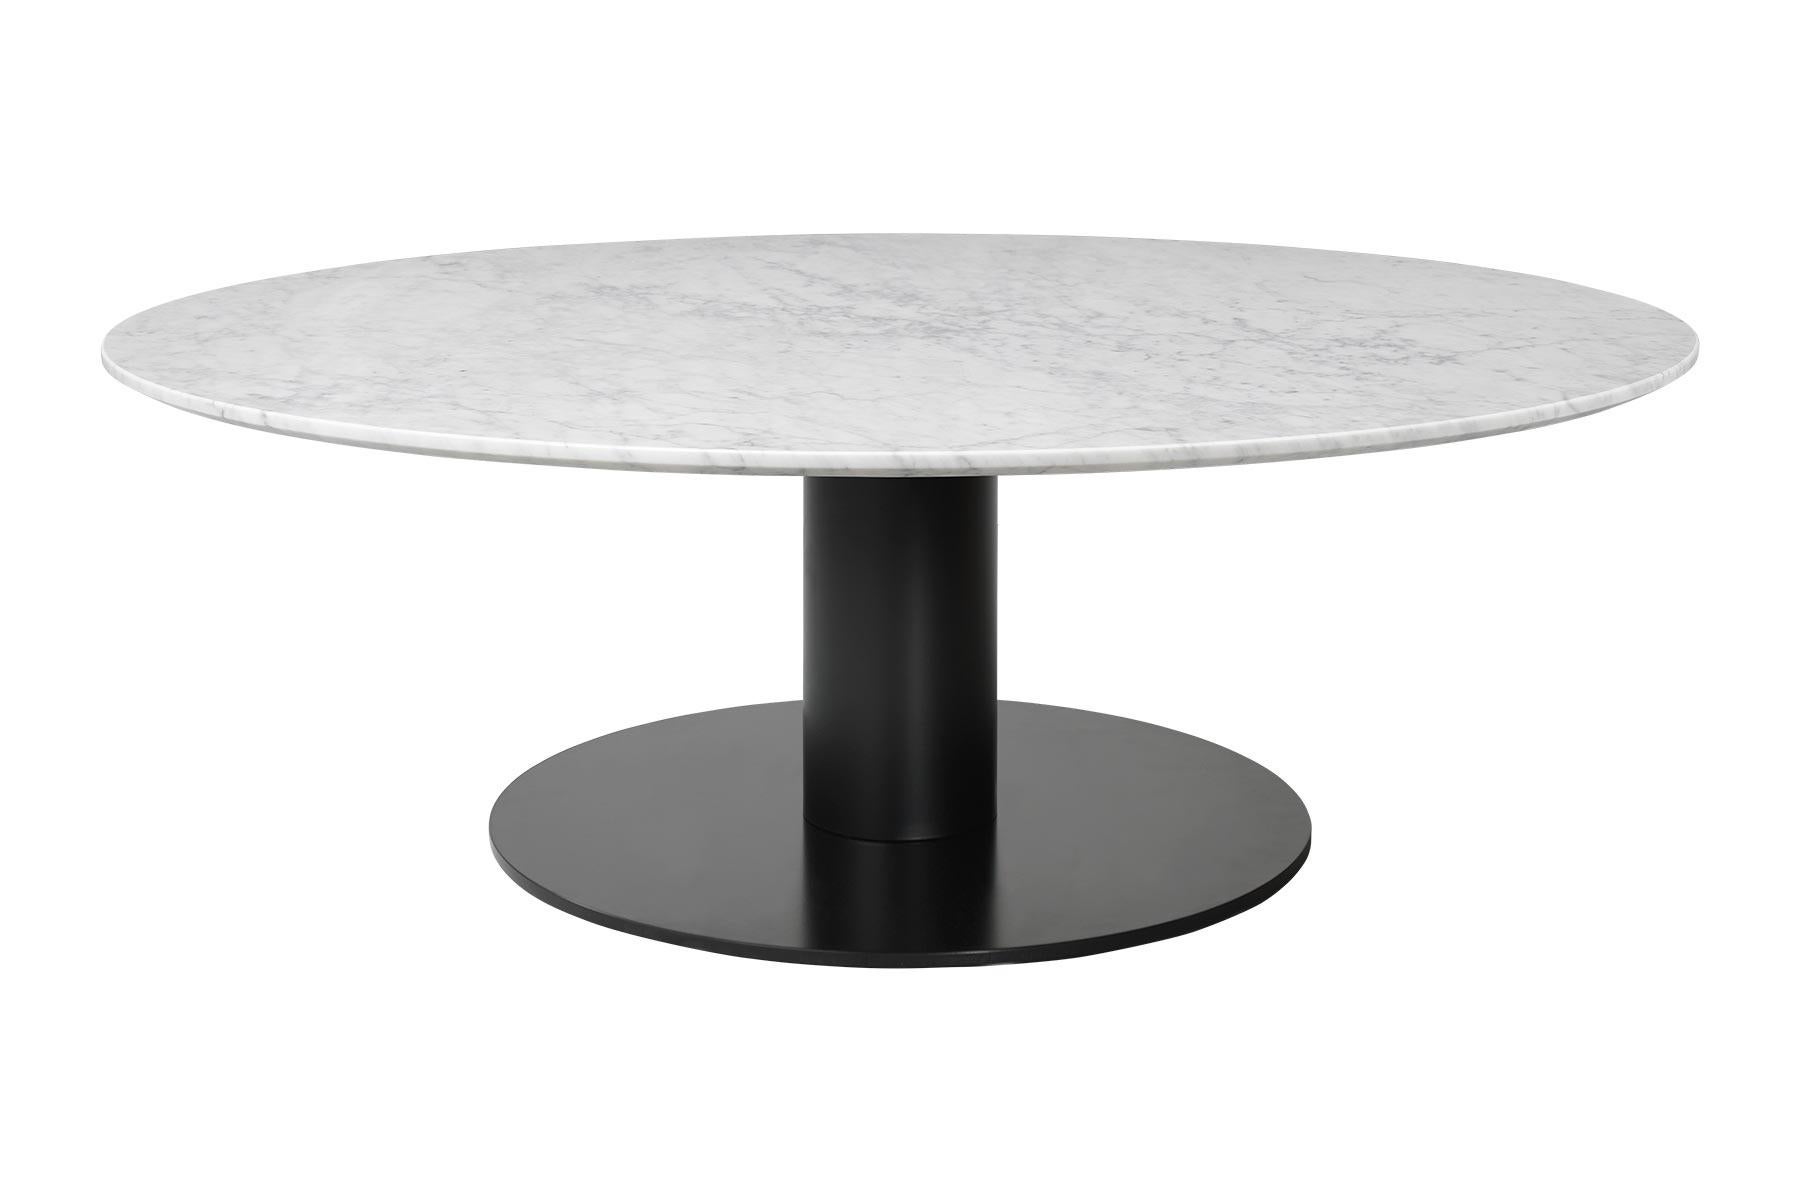 The Gubi 2.0 lounge table by Gubi is made of the finest materials contributing to its unique and exclusive identity. With its circular shape, the table celebrates the authentic way of bringing people together and enables an intimate interaction